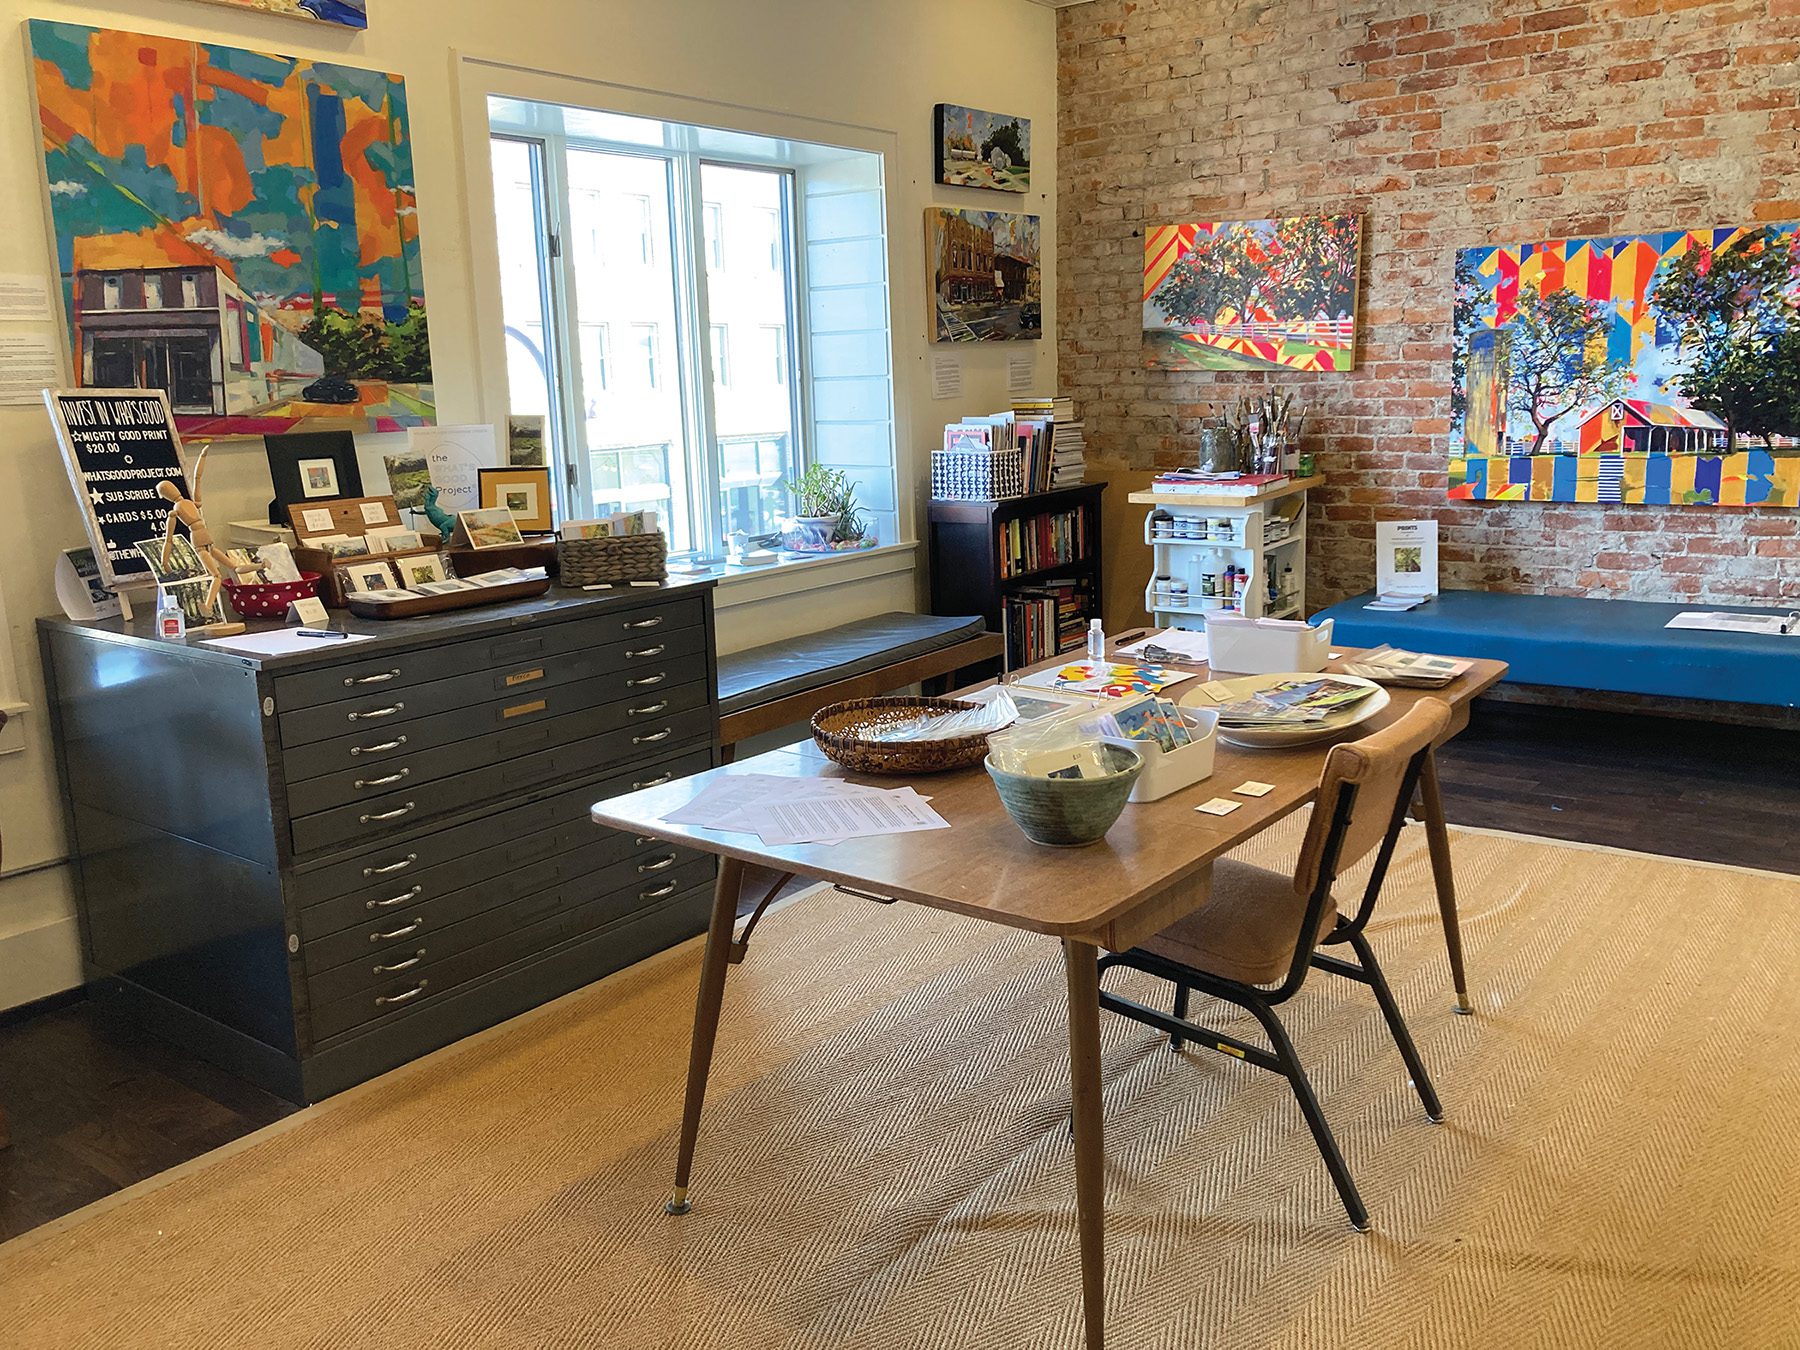 Artist Jennifer Drinkwater's art studio space with table and artwork